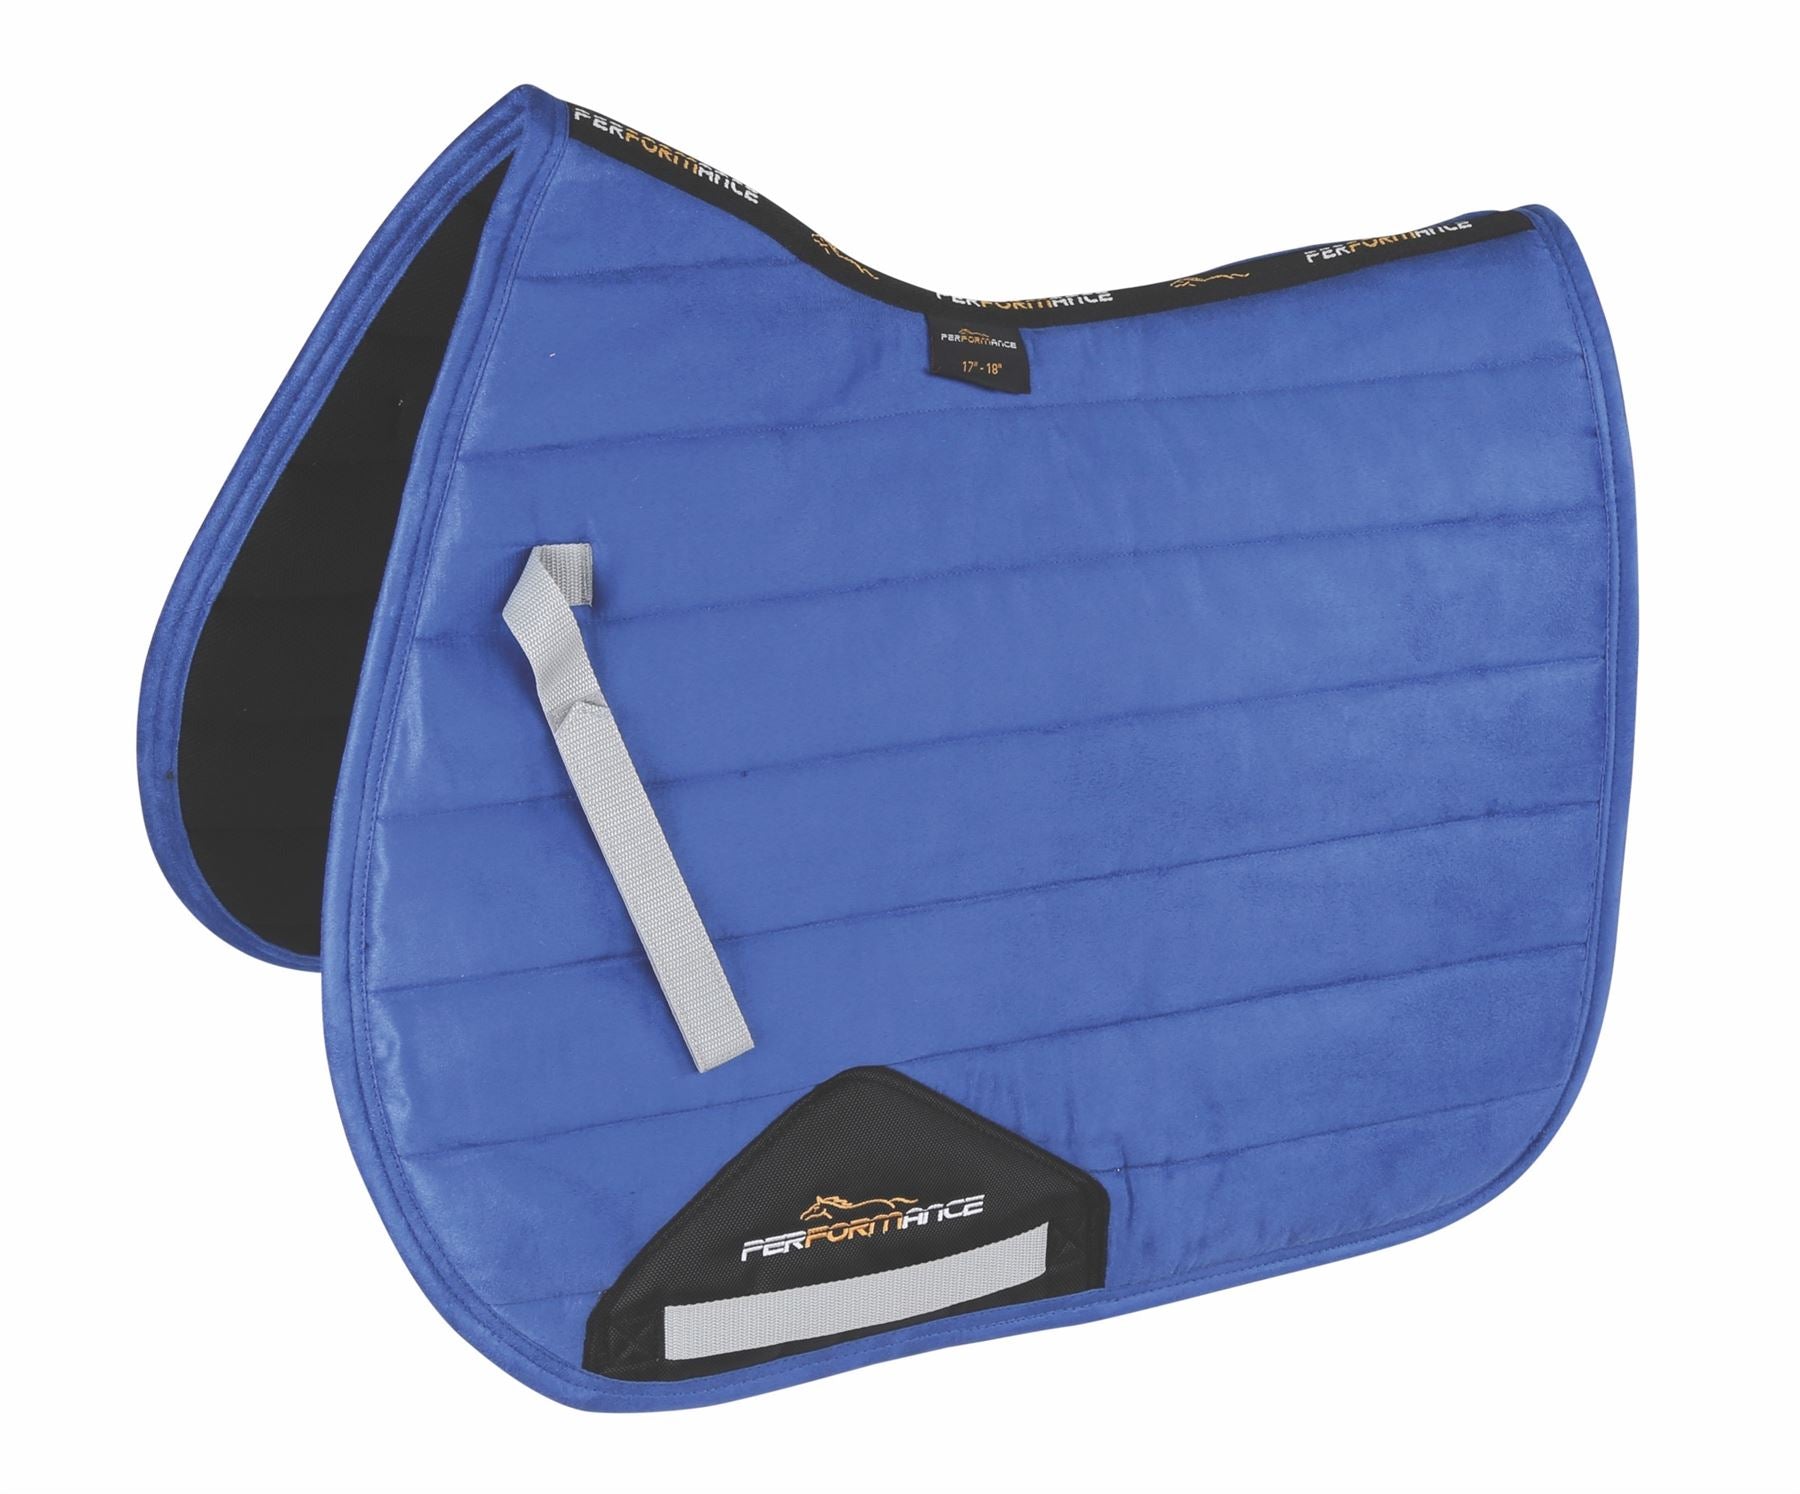 Shires Performance H/Wither Suede Comfort Pad - Just Horse Riders